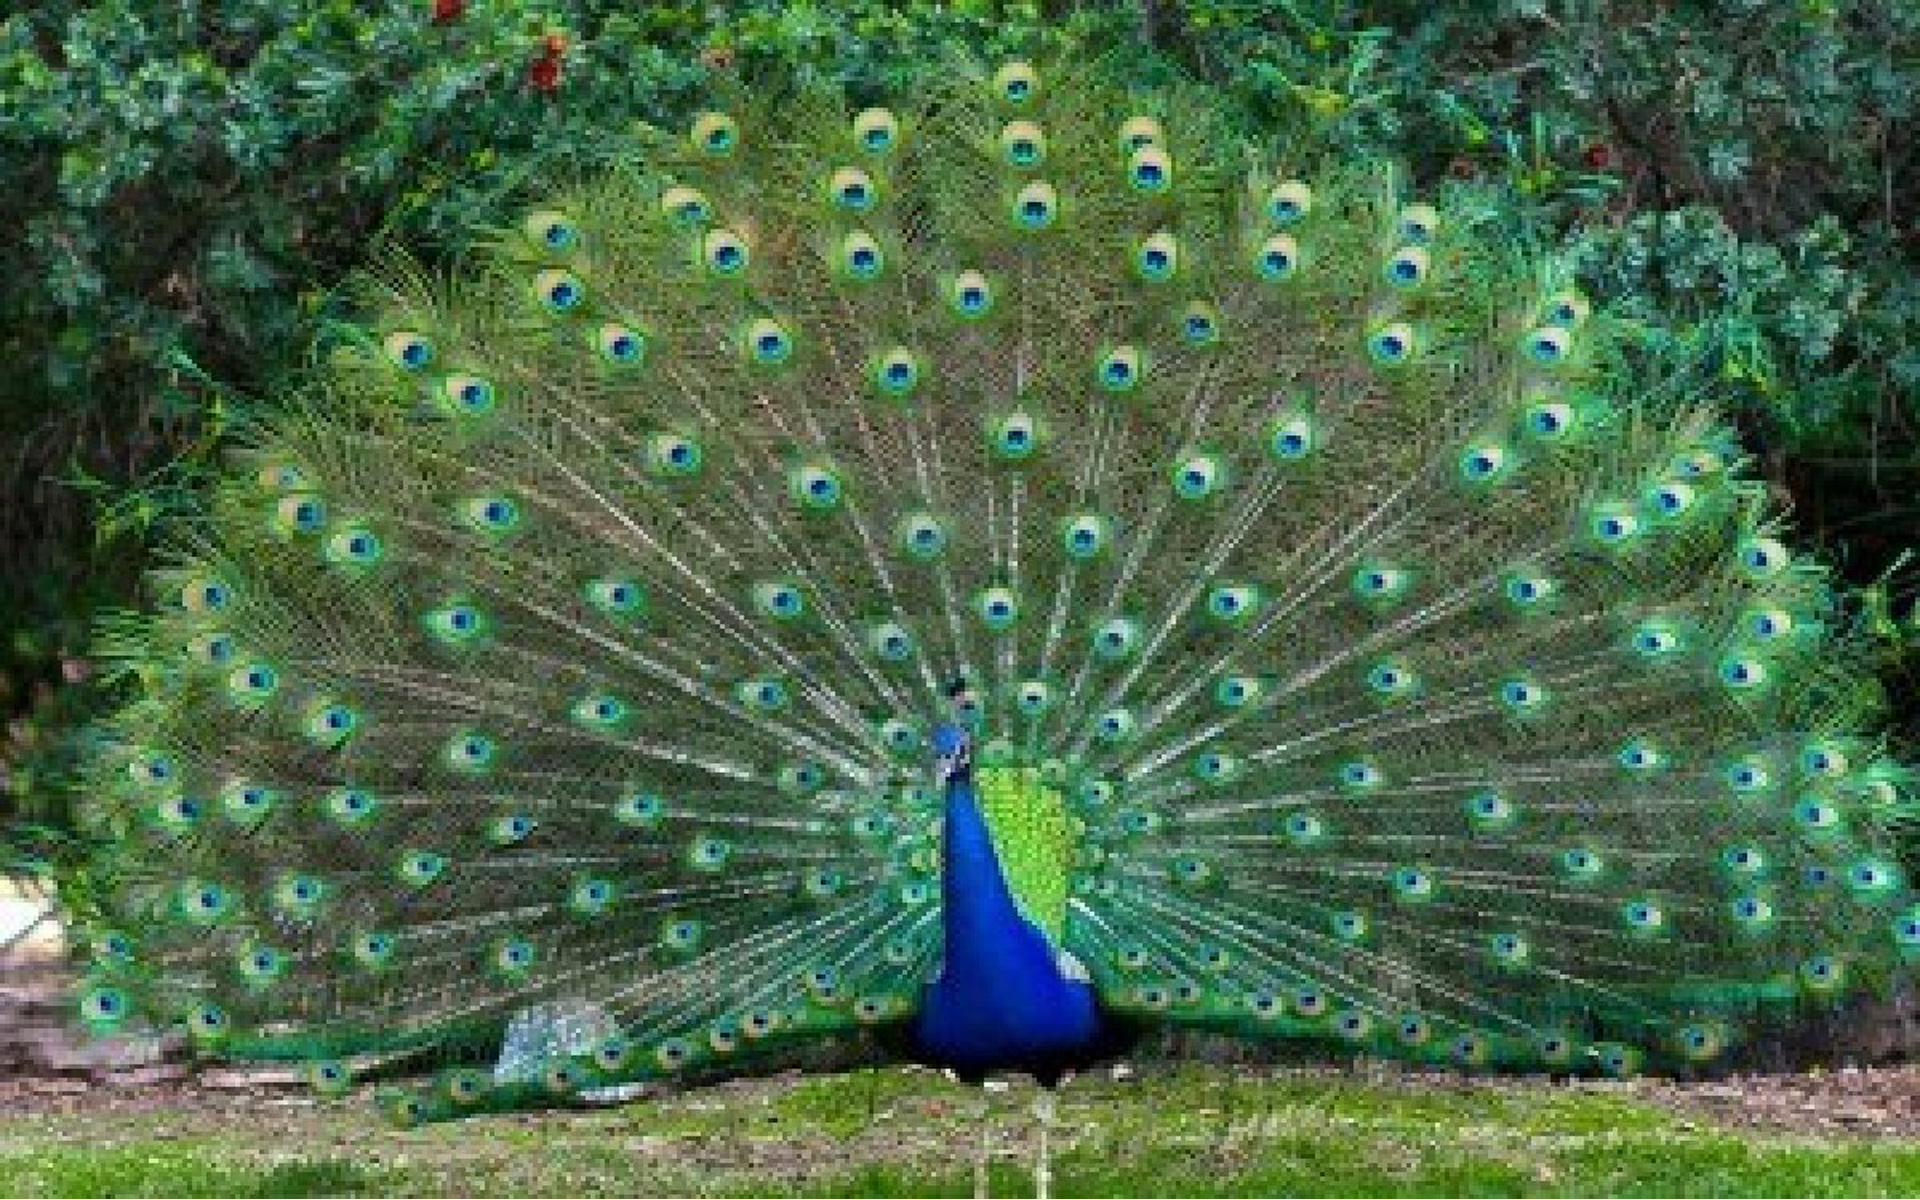 Nice Peacock Image Live HD Wallpaper Hq Pictures